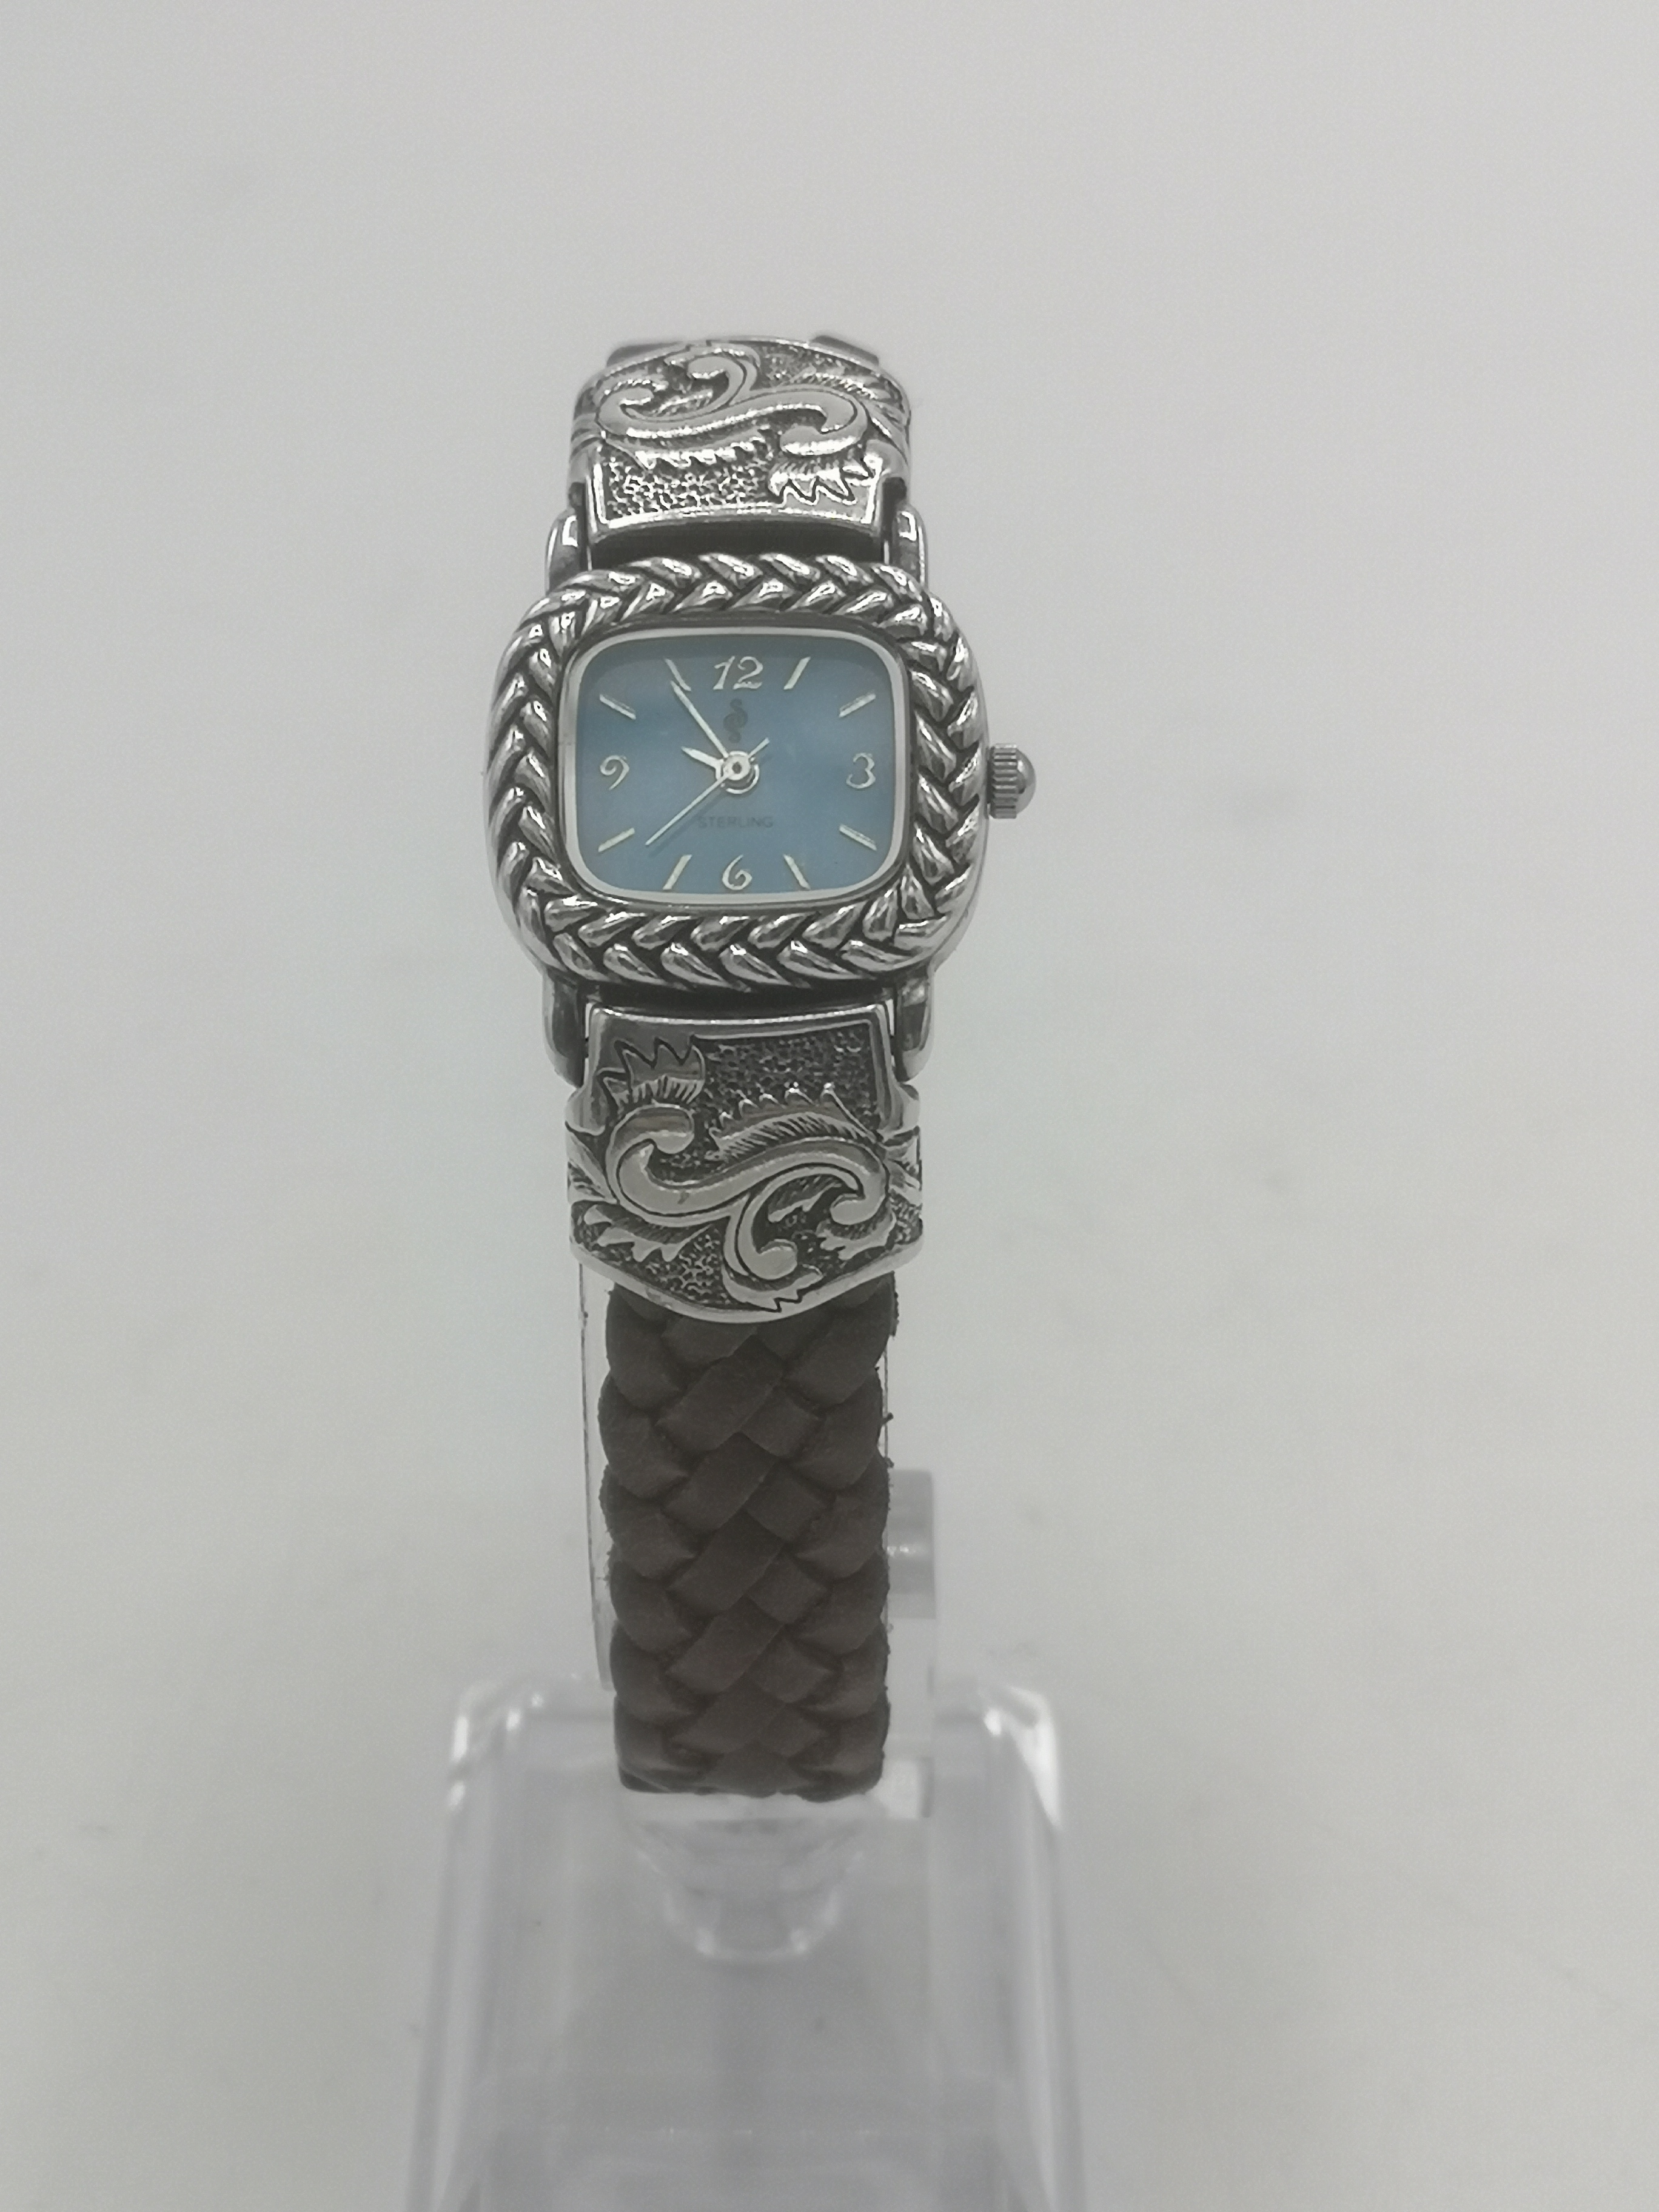 Sterling silver wrist watch - Image 2 of 7